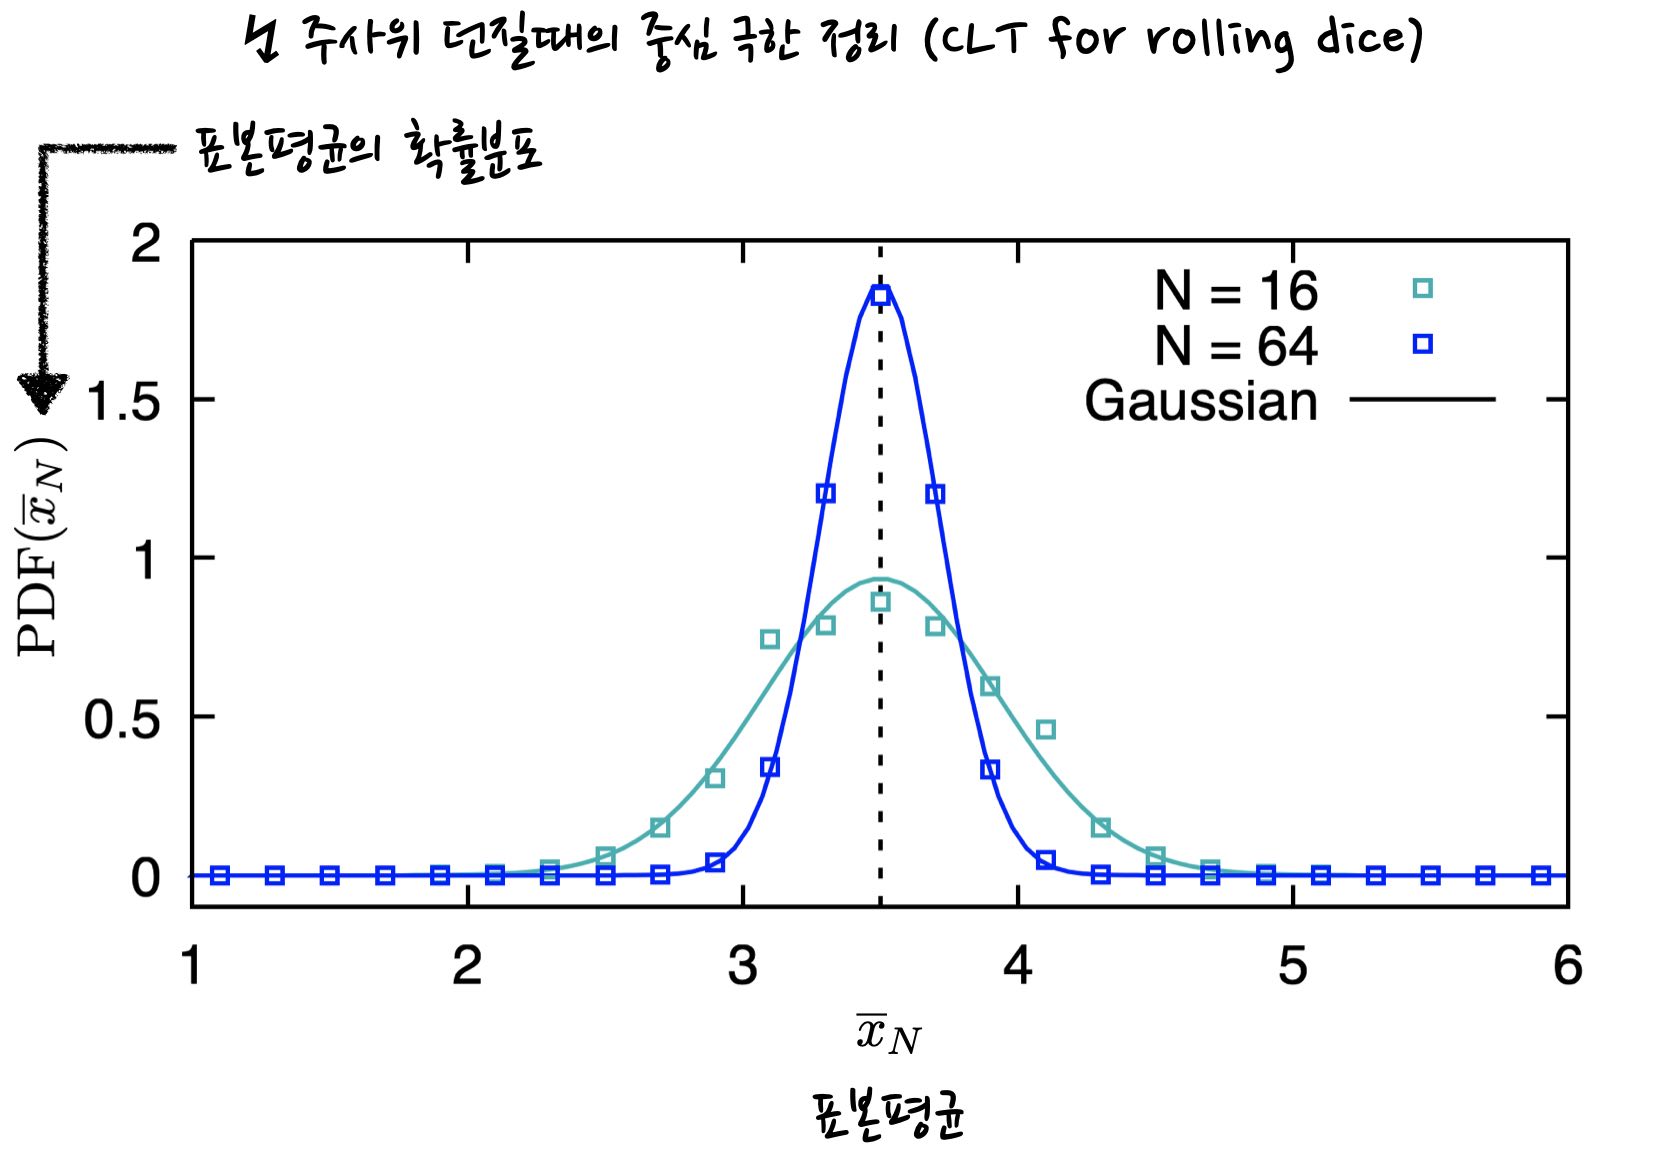 plot for probability density function of the sample average of rolling dice. Two cases of 16 and 64 samples are shown, and it is demonstrated that the probability density function becomes closer to Gaussian function.